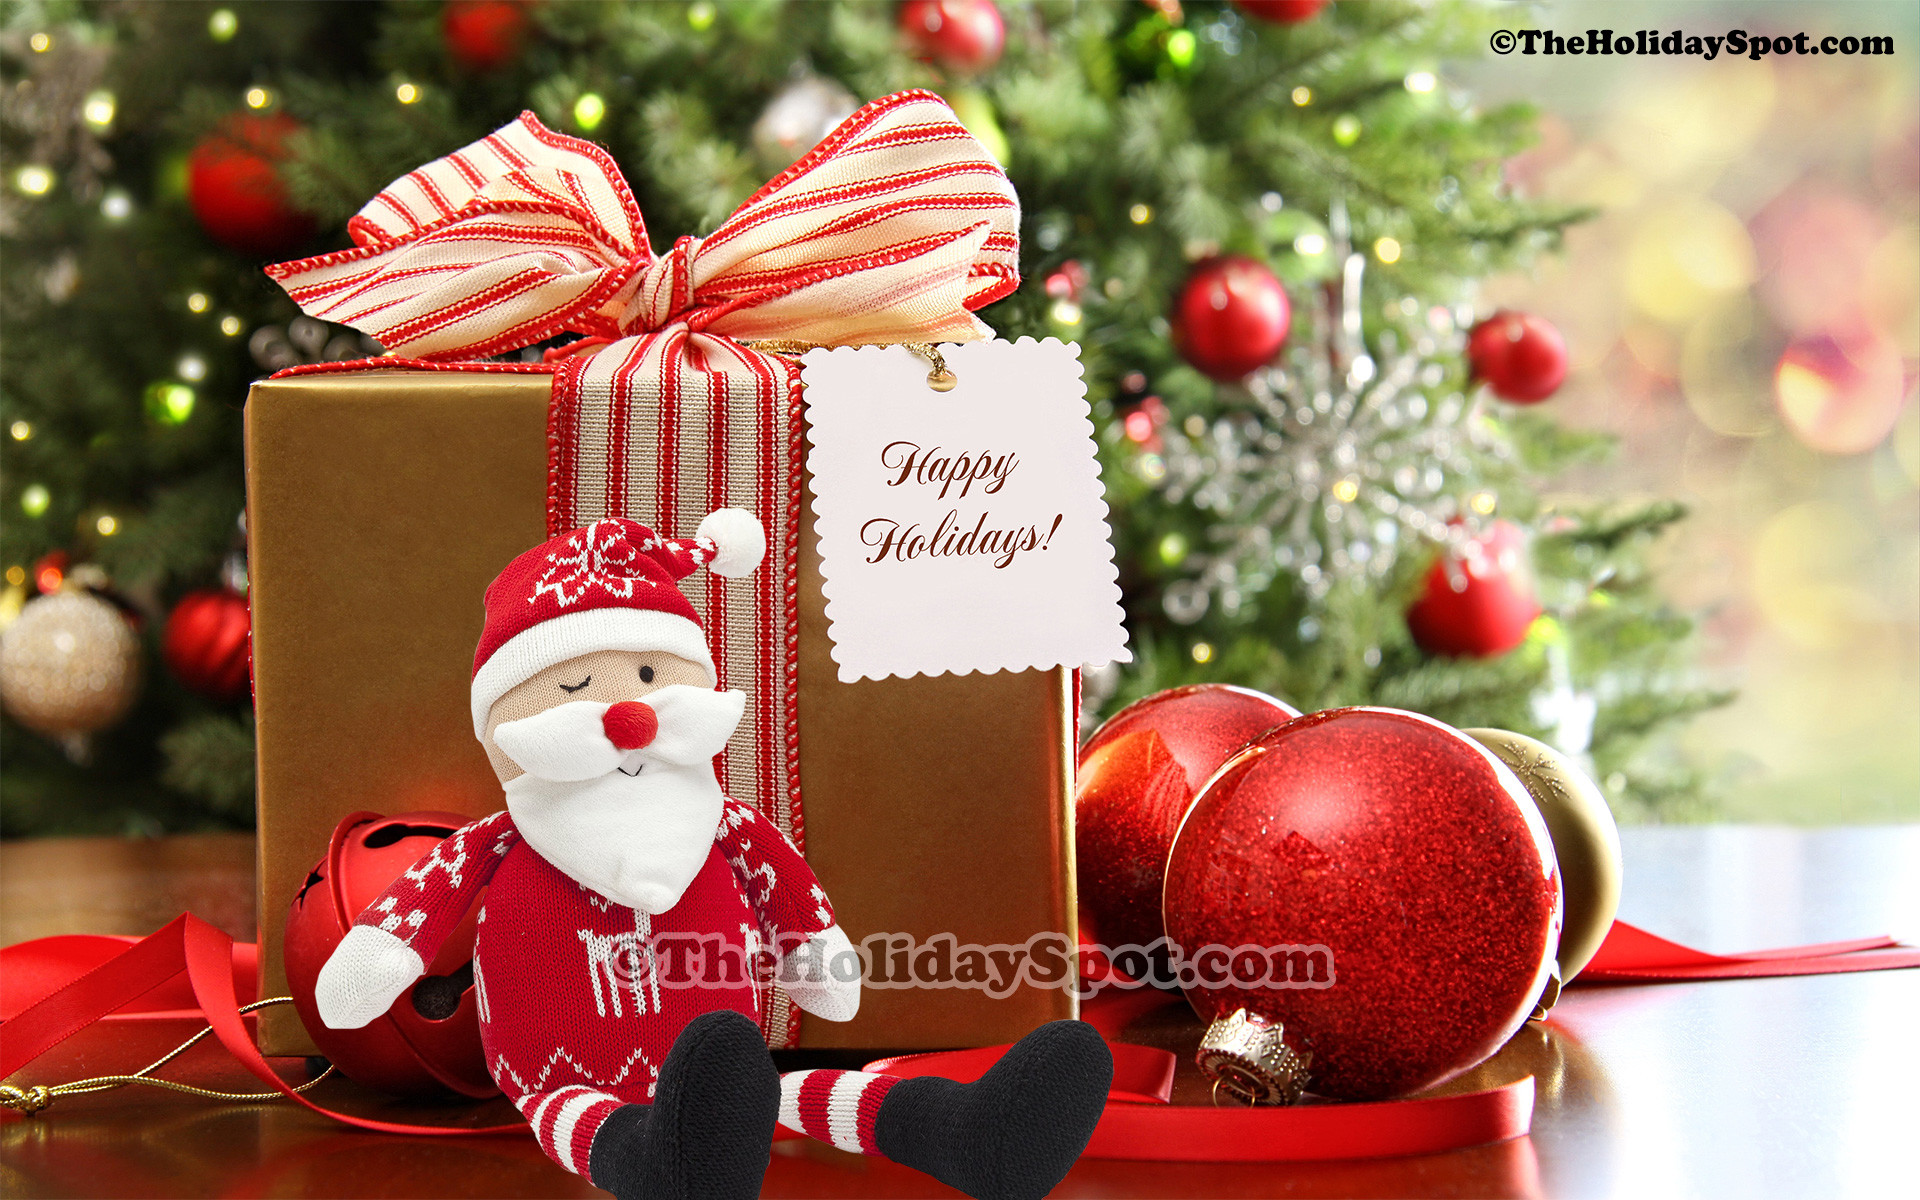 1920x1200 Christmas wallpaper - gifts on the occasion of Christmas.